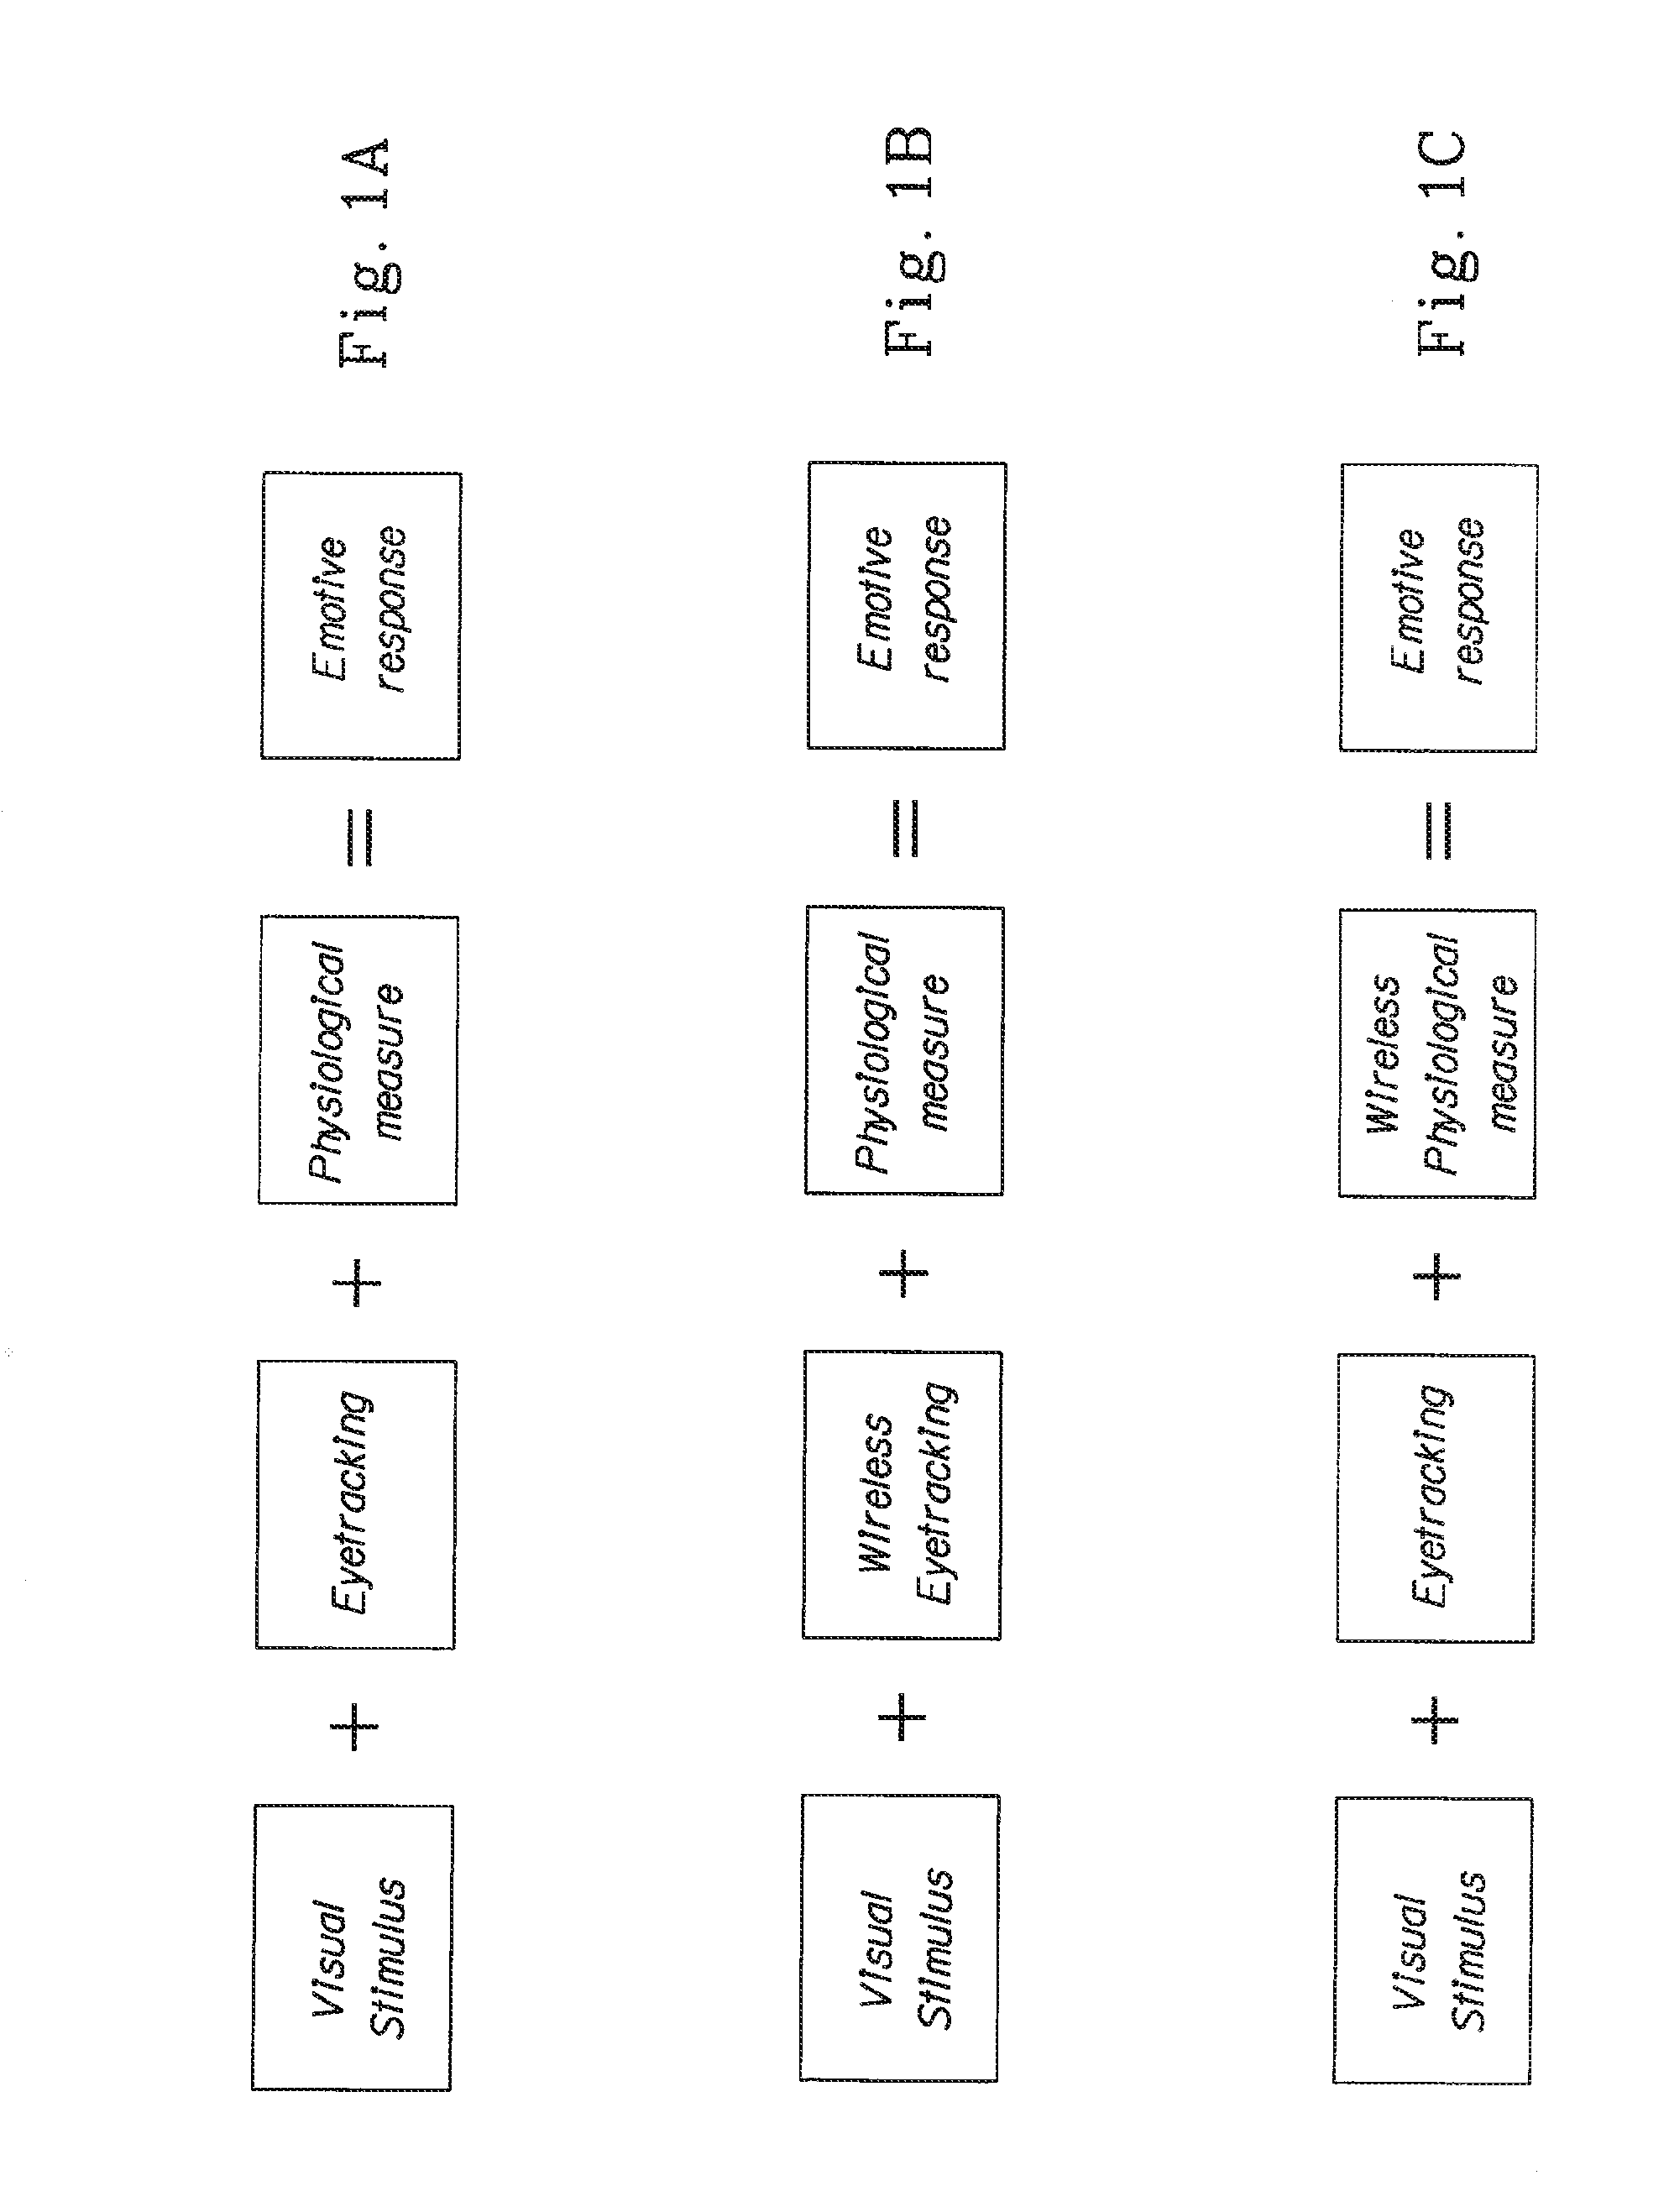 Methods for Measuring Emotive Response and Selection Preference